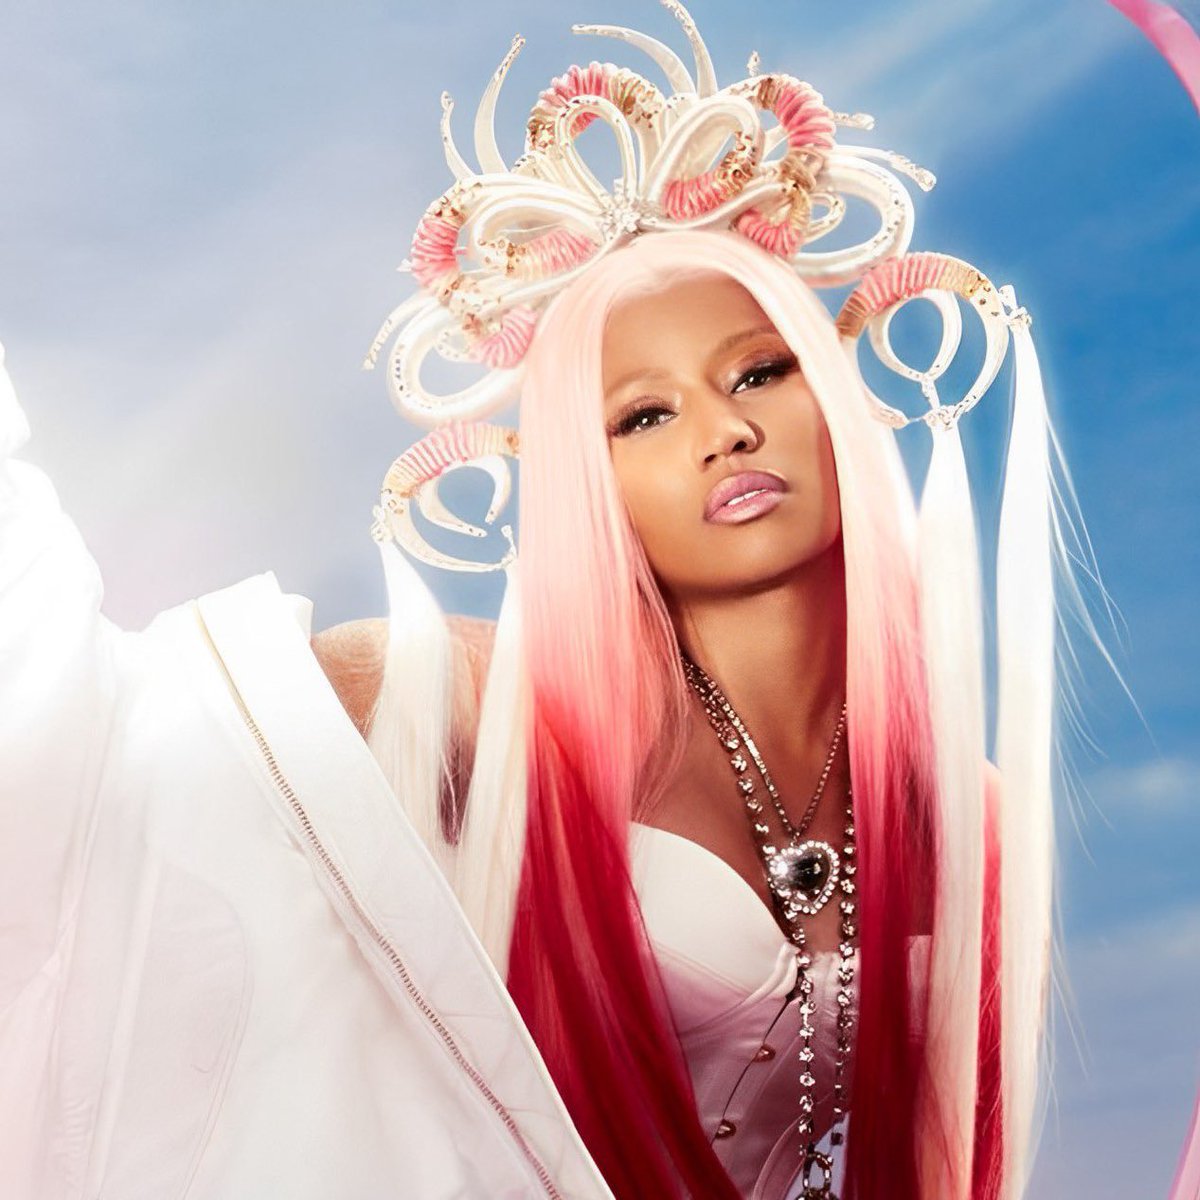 .@NICKIMINAJ is the most nominated female artist at this year's #BETAwards.